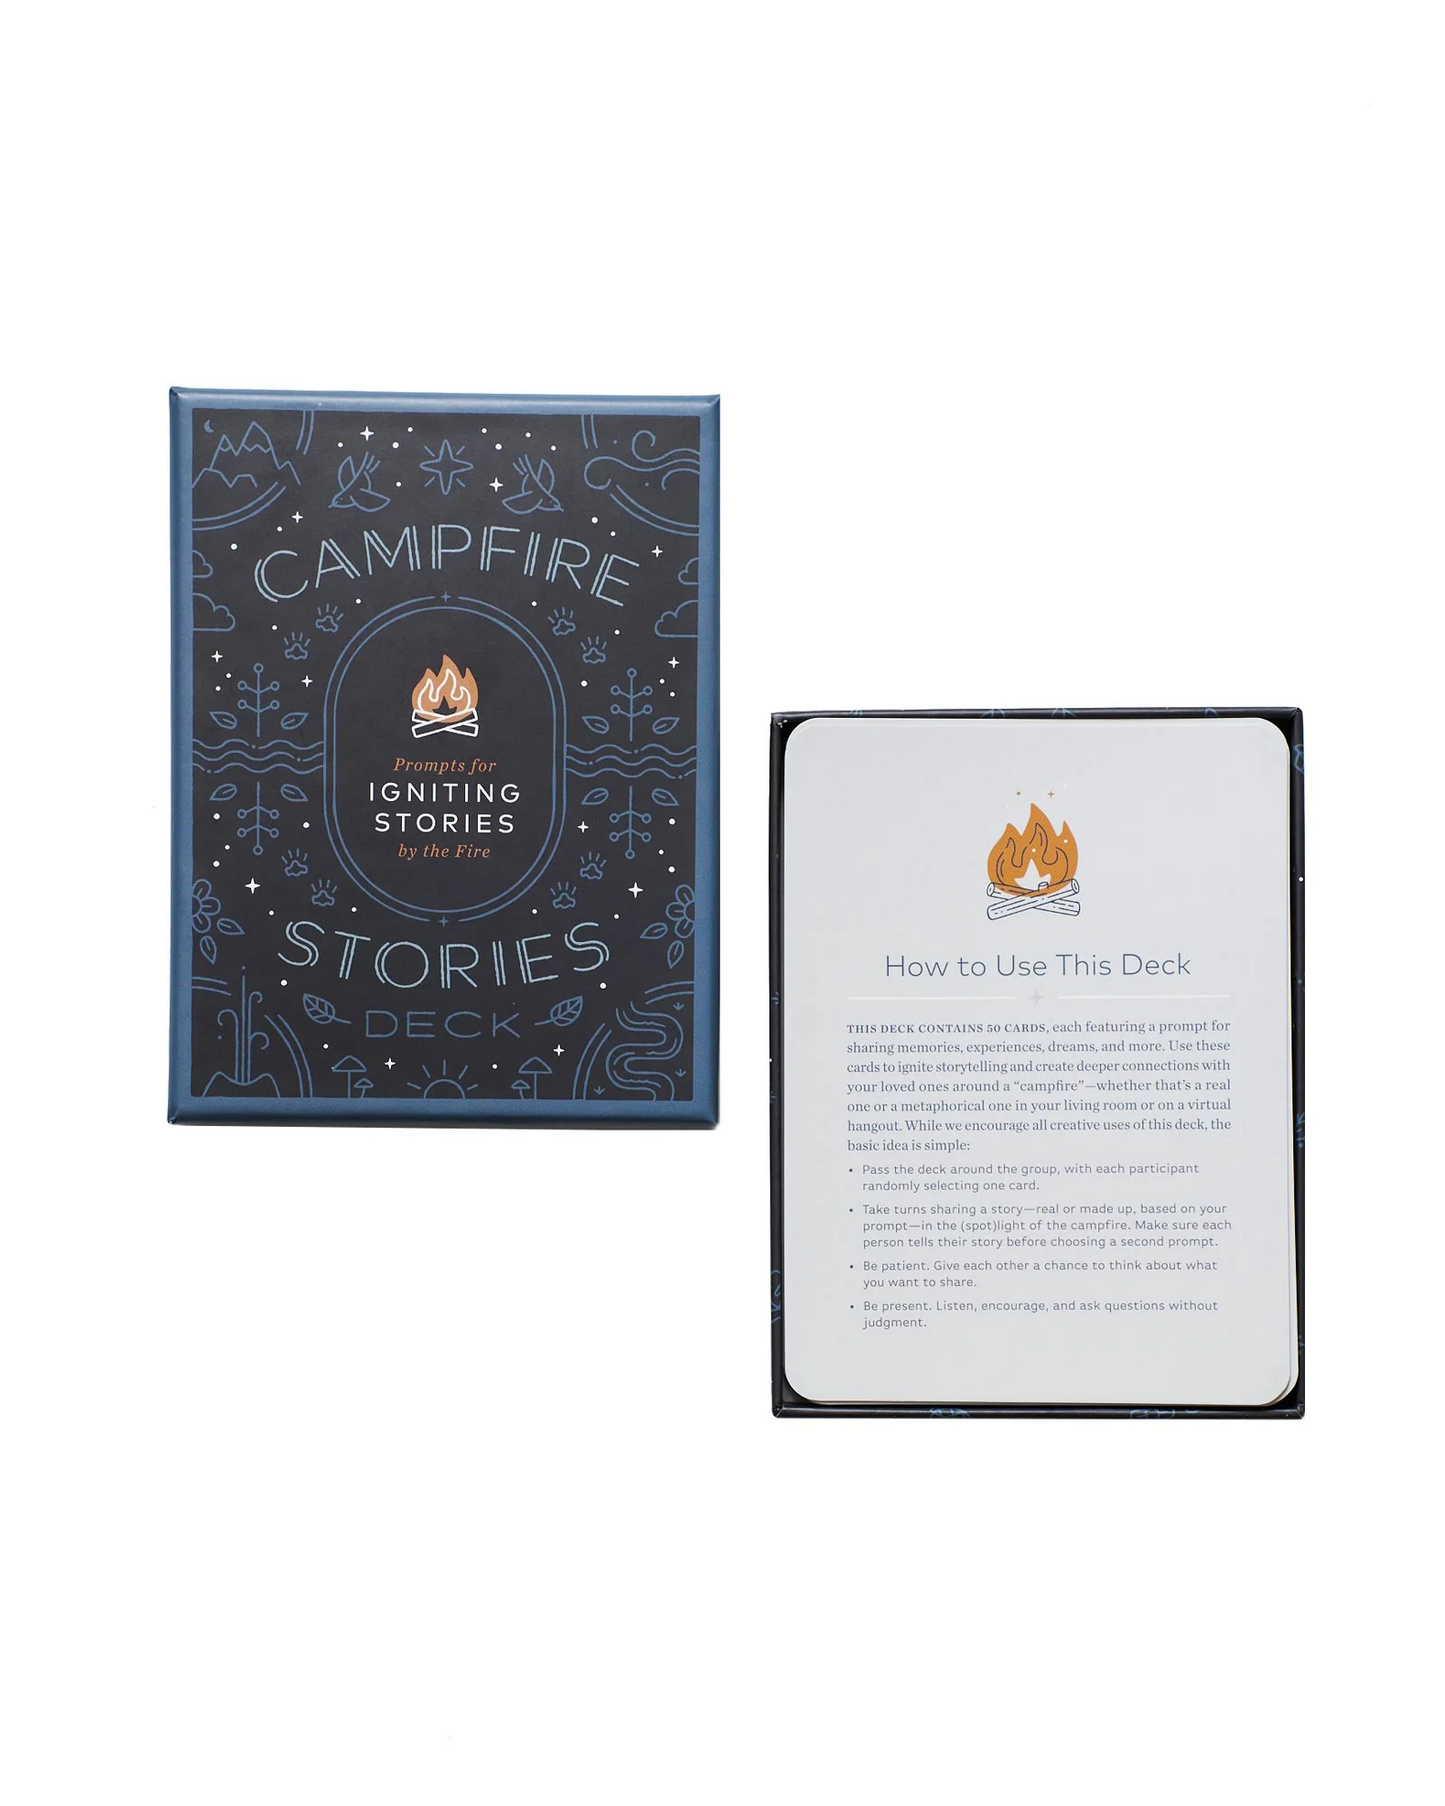 Parks Project Campfire Stories Deck: Prompts for Igniting Stories